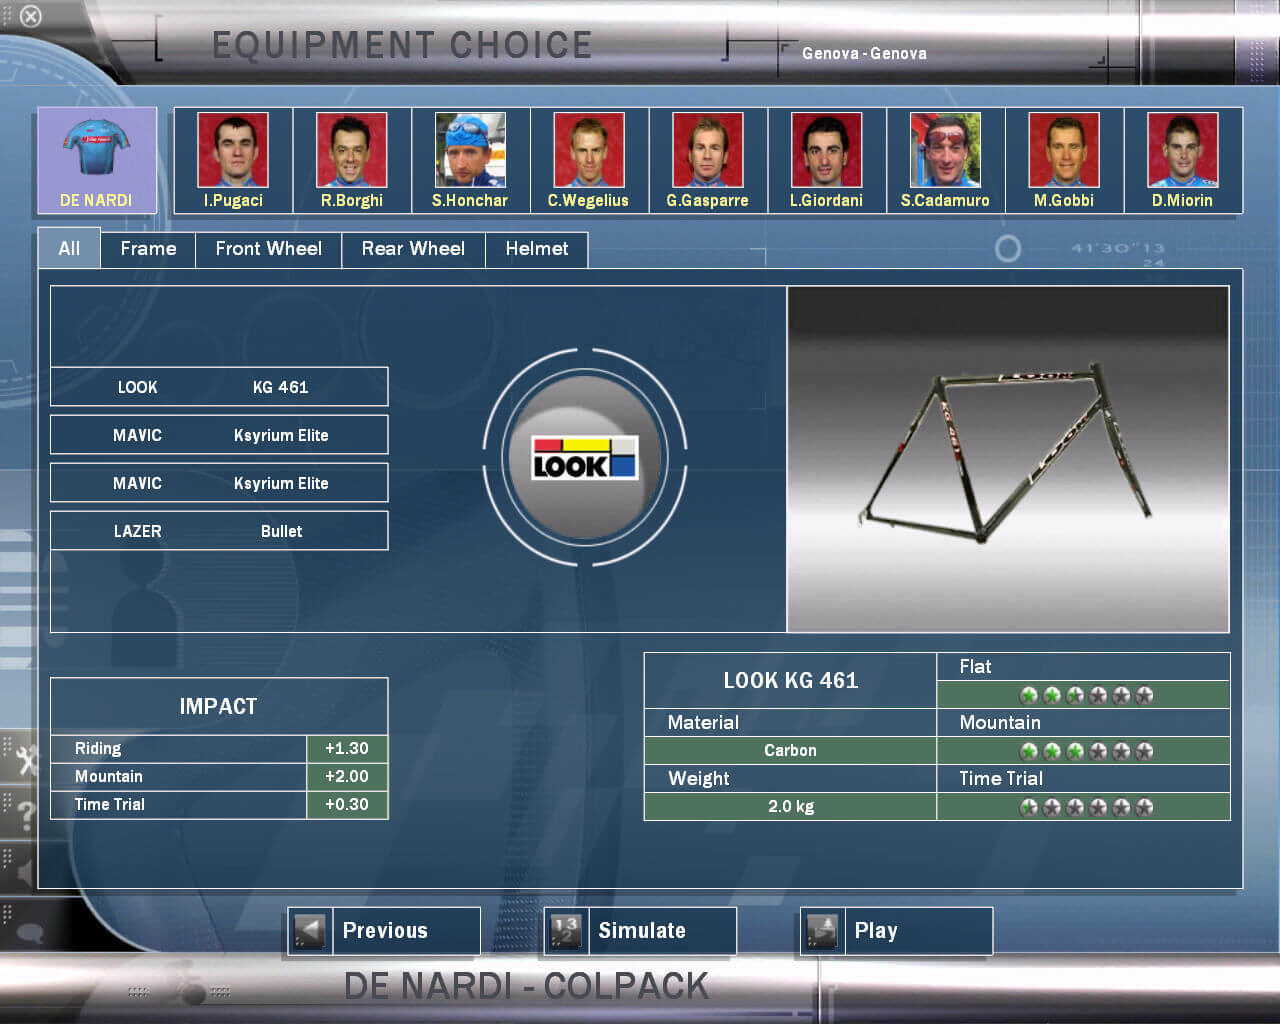 Pro Cycling Manager 2017 Windows game - Mod DB